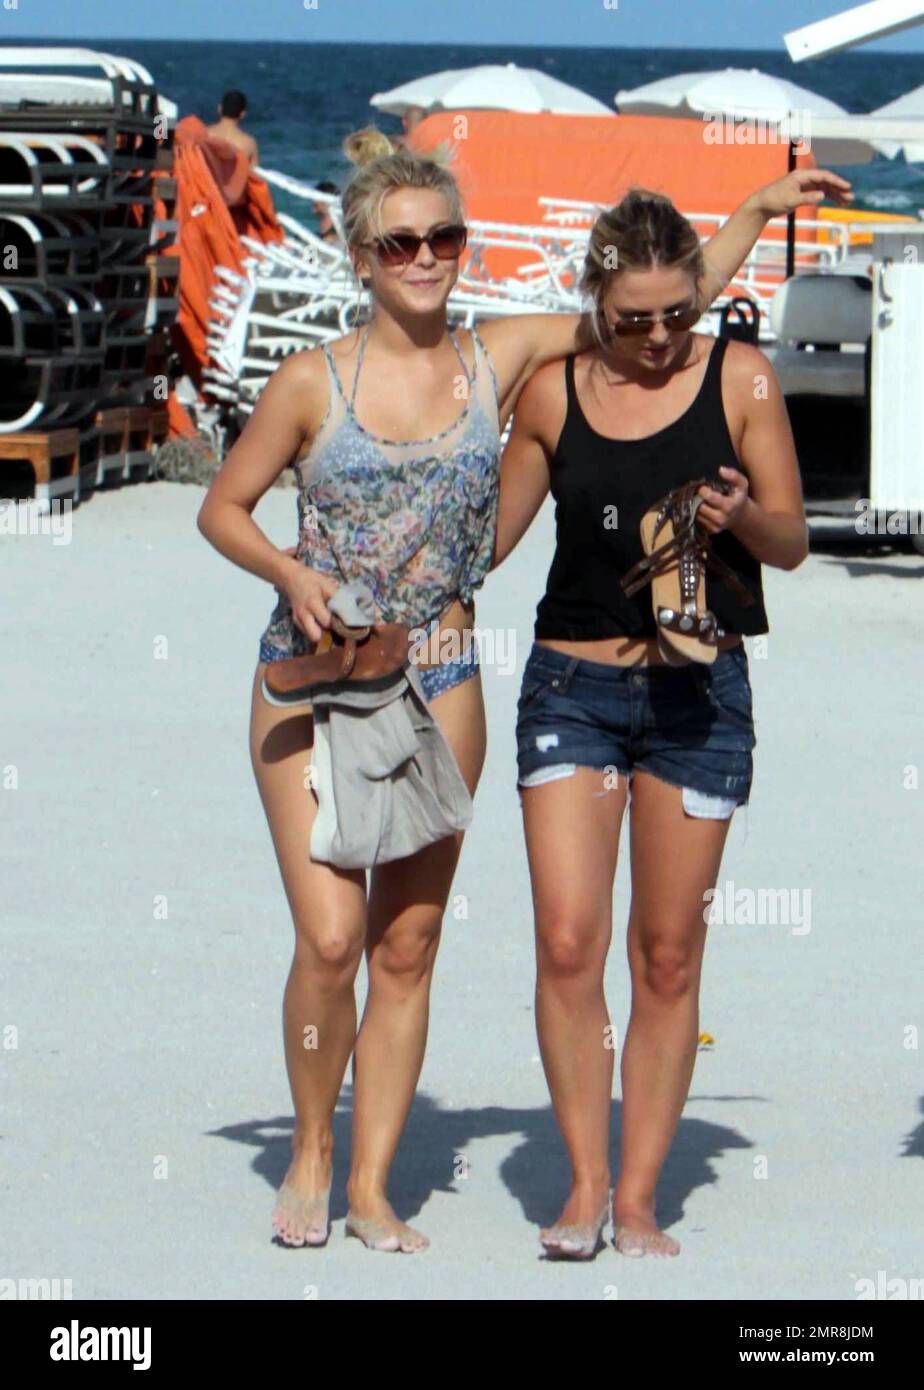 Julianne Hough, spends an early birthday weekend with her boyfriend Ryan Seacrest, brother Derek Hough, mother Mari Anne and best friend Maude who all flew into Miami to be with the actress who is currently filming Rock Of Ages. Julianne wore a blue bikini to take a dip in the hotel pool and also ventured into the ocean with the group who all appeared to be having a great time. Julianne will turn 23 on Wednesday. Miami Beach, FL. 7/16/11. Stock Photo